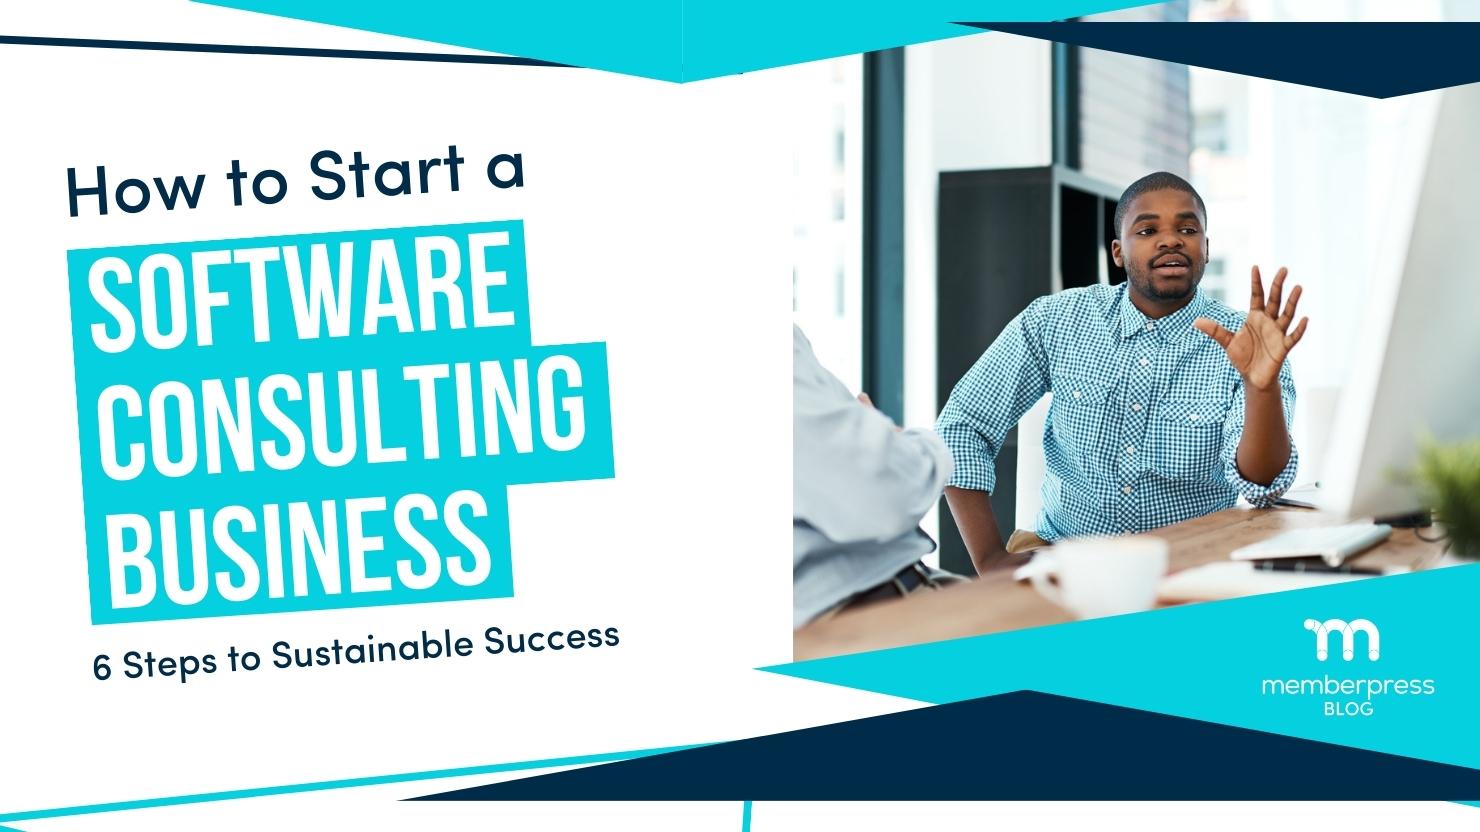 How to Start a Software Consulting Business